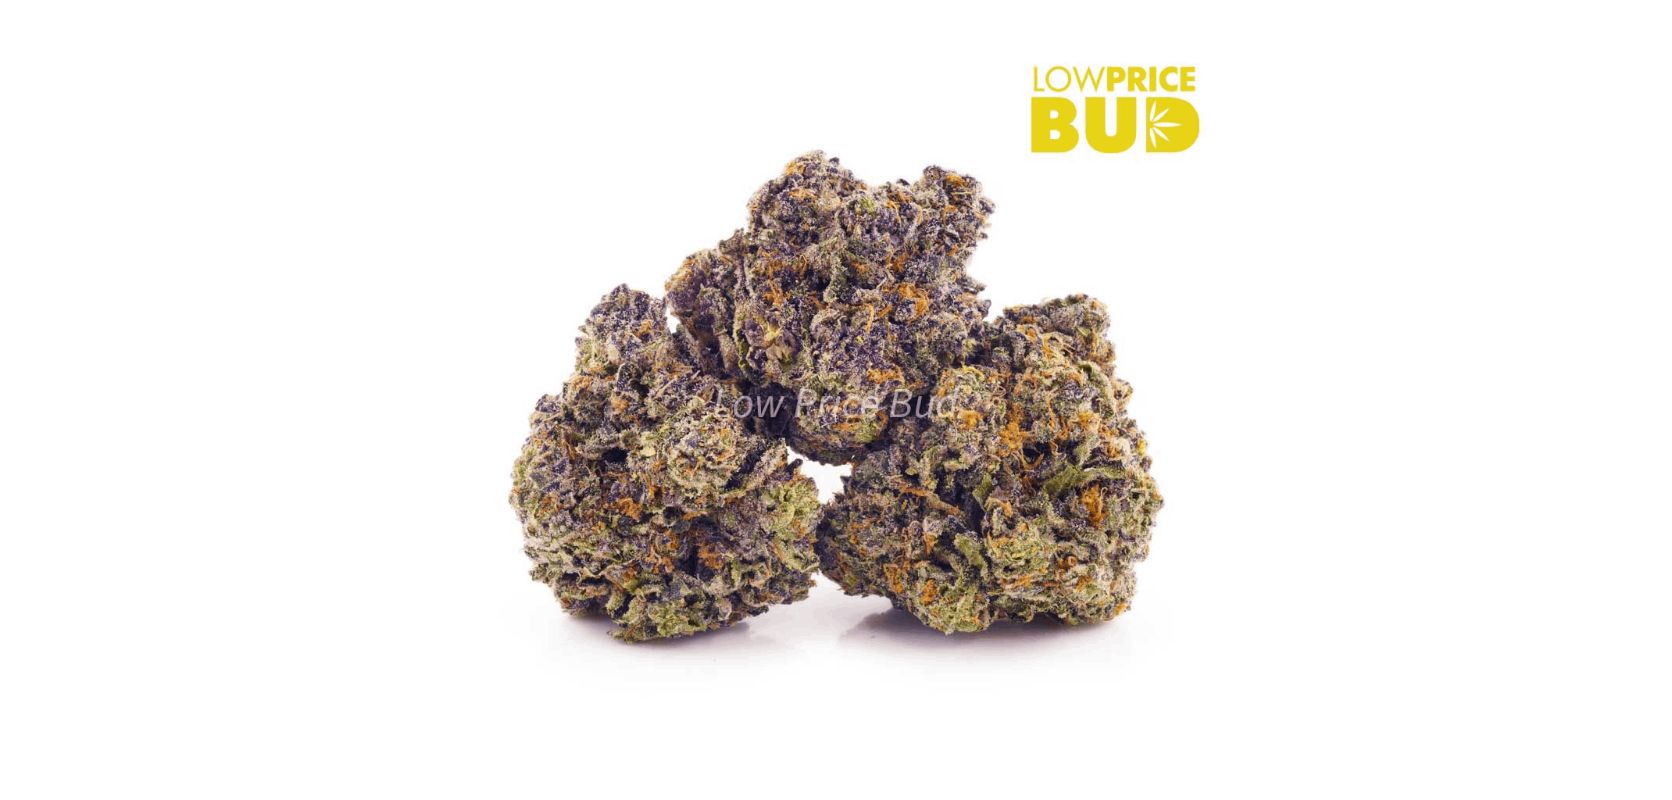 You can order 28 grams of exotic Purple Space Cookies weed online for only $140 from our budding online sale section right now. 